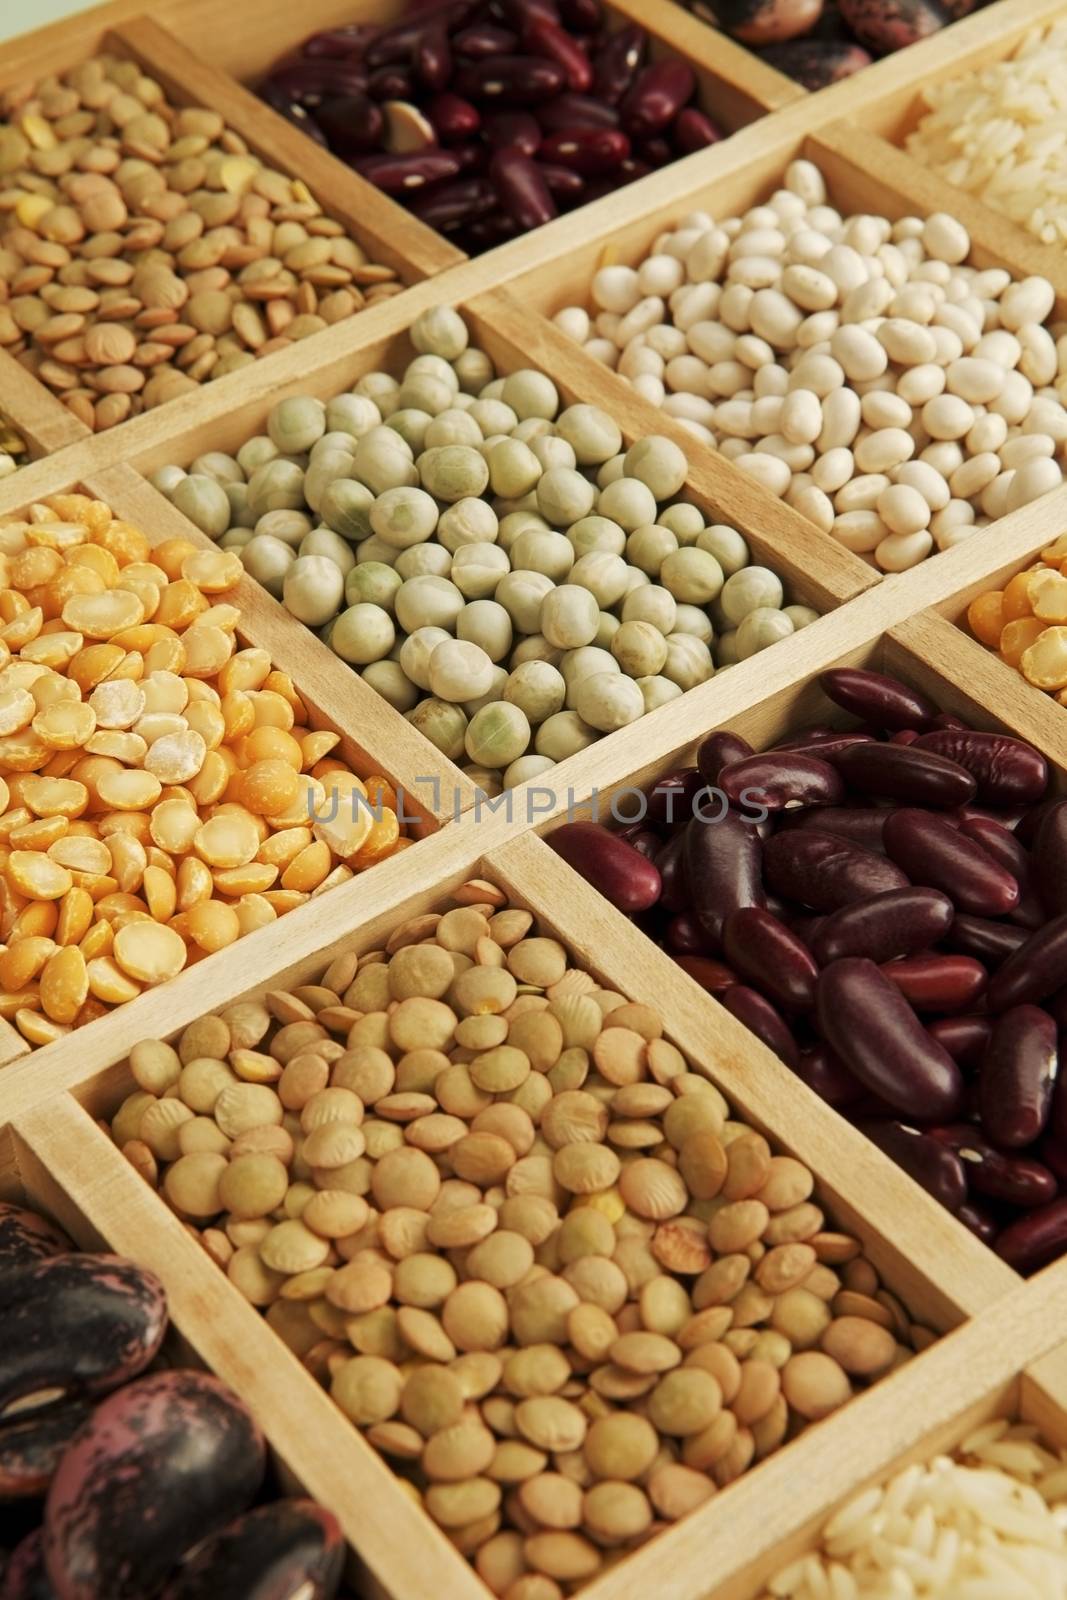 Variation of different beans, lentils and peas in wooden box.